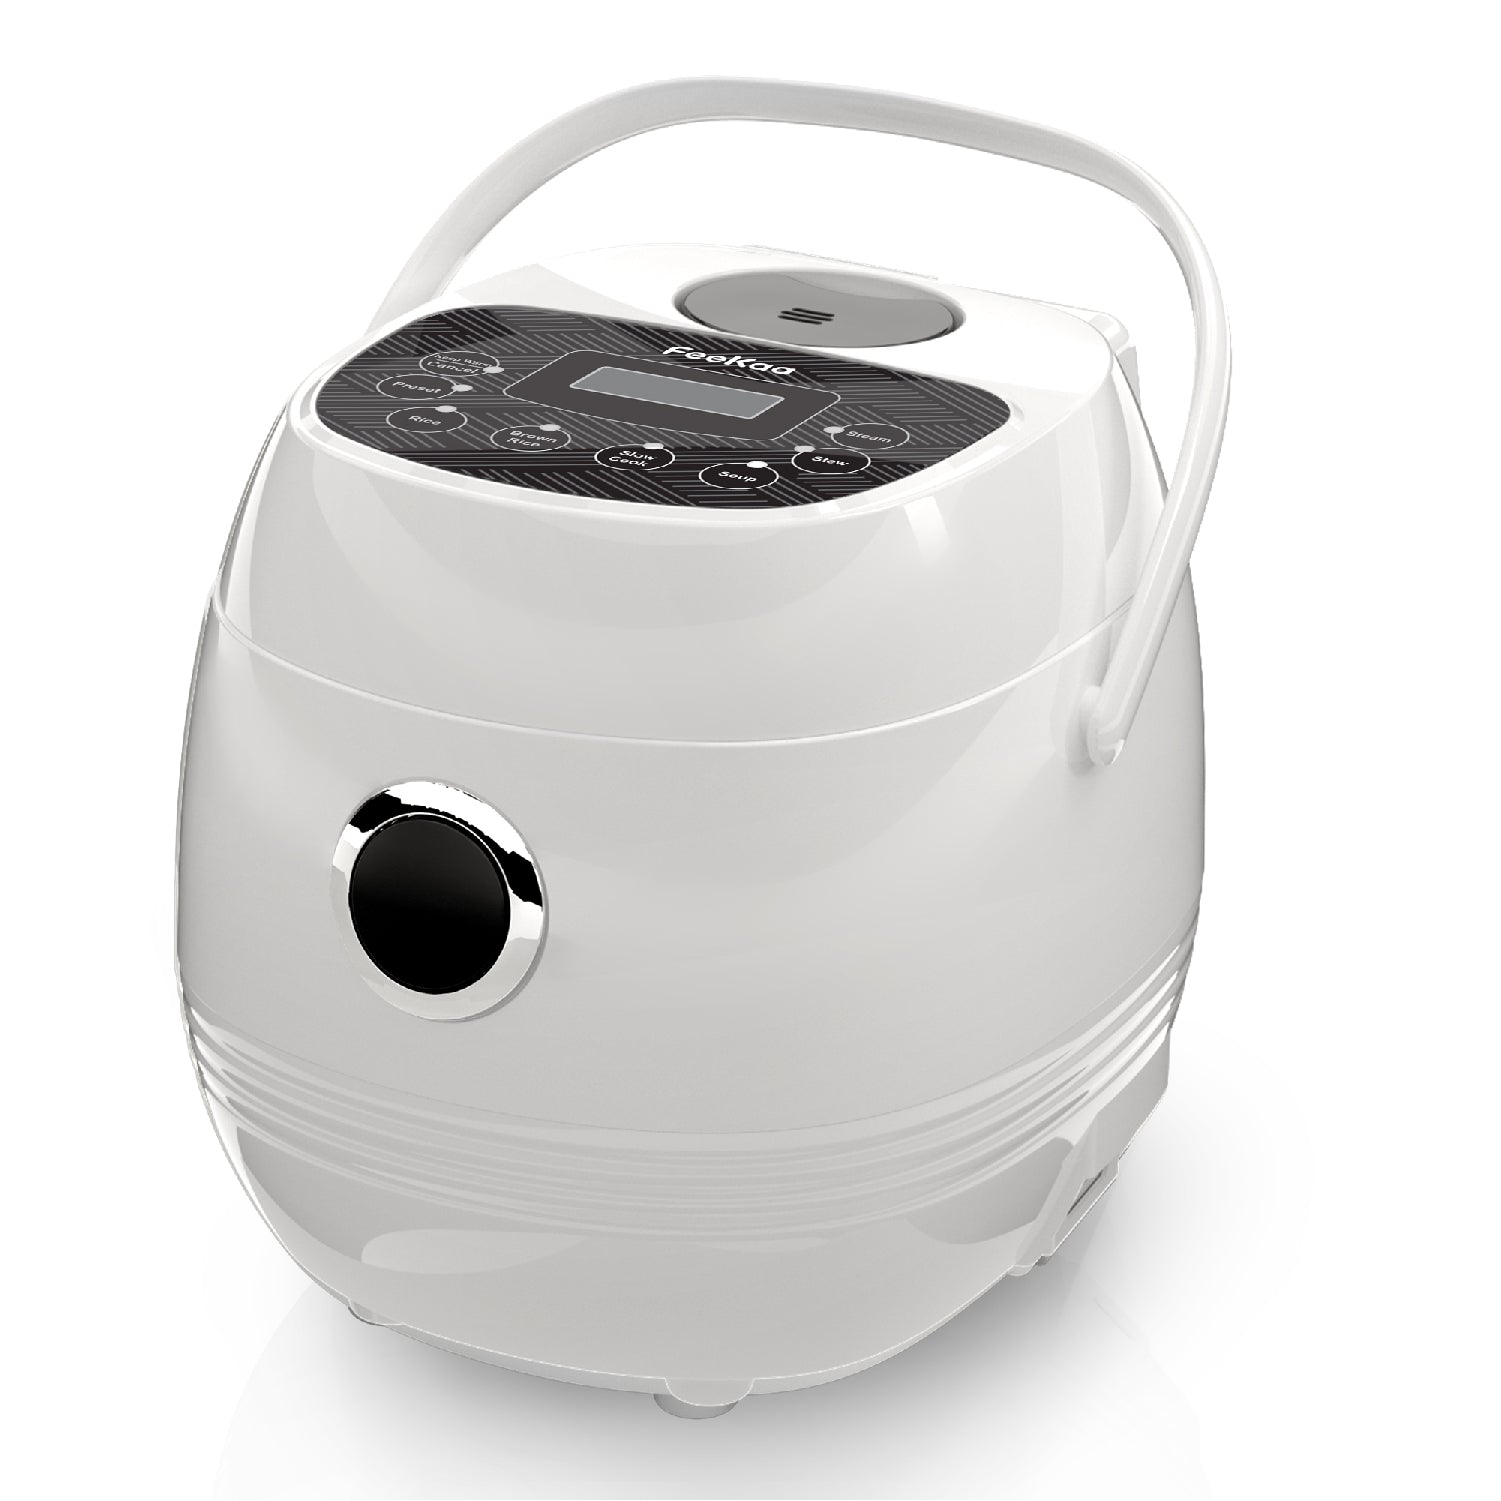 Smart Mini Rice Cooker 3 Cups Uncooked,1.6L Rice Cooker Small